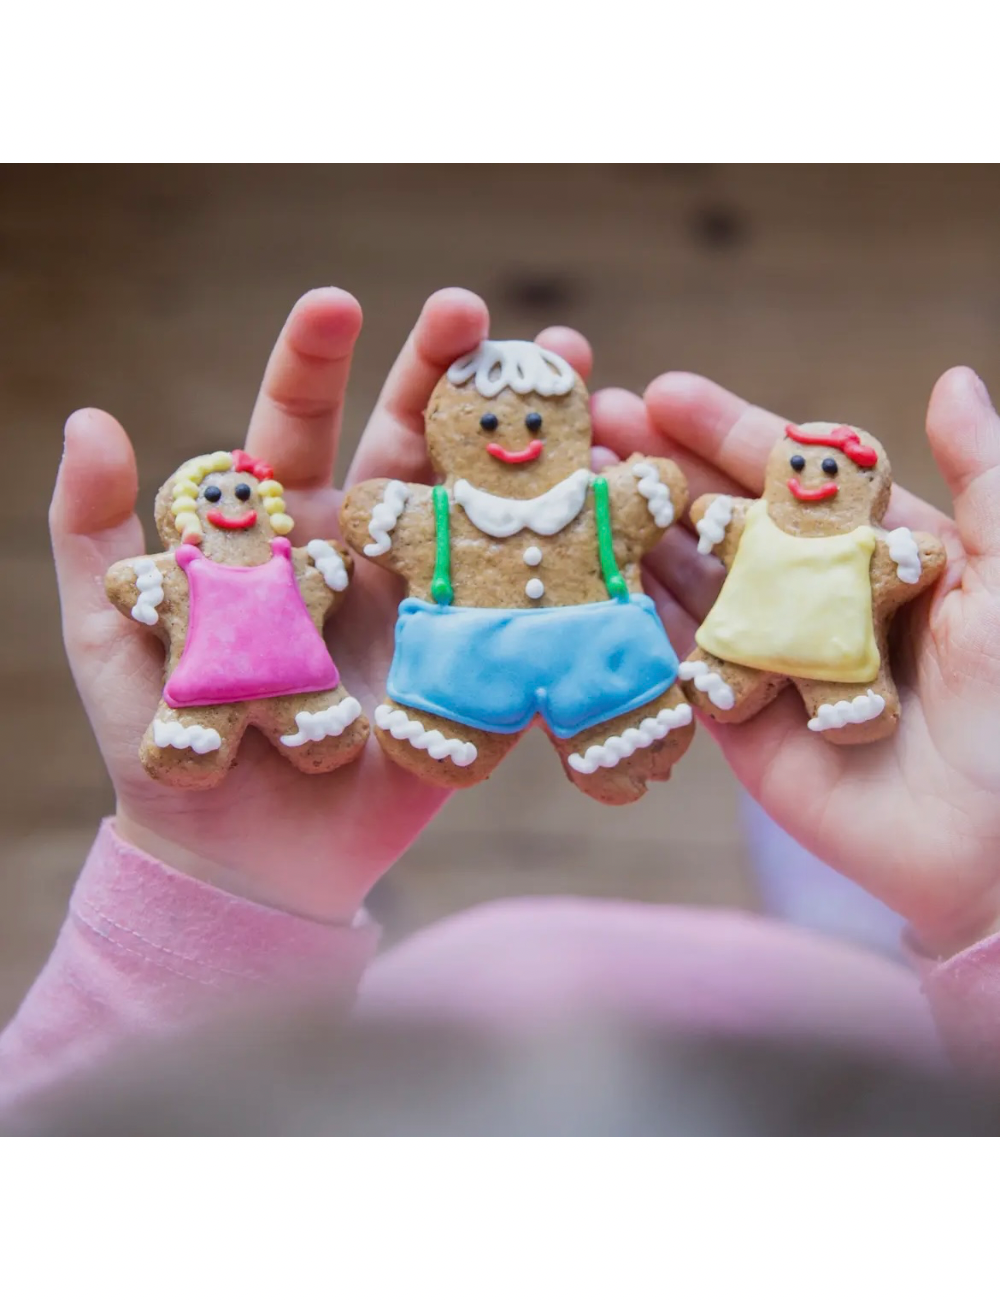 Dolly Biscuit Bake And Craft Kit